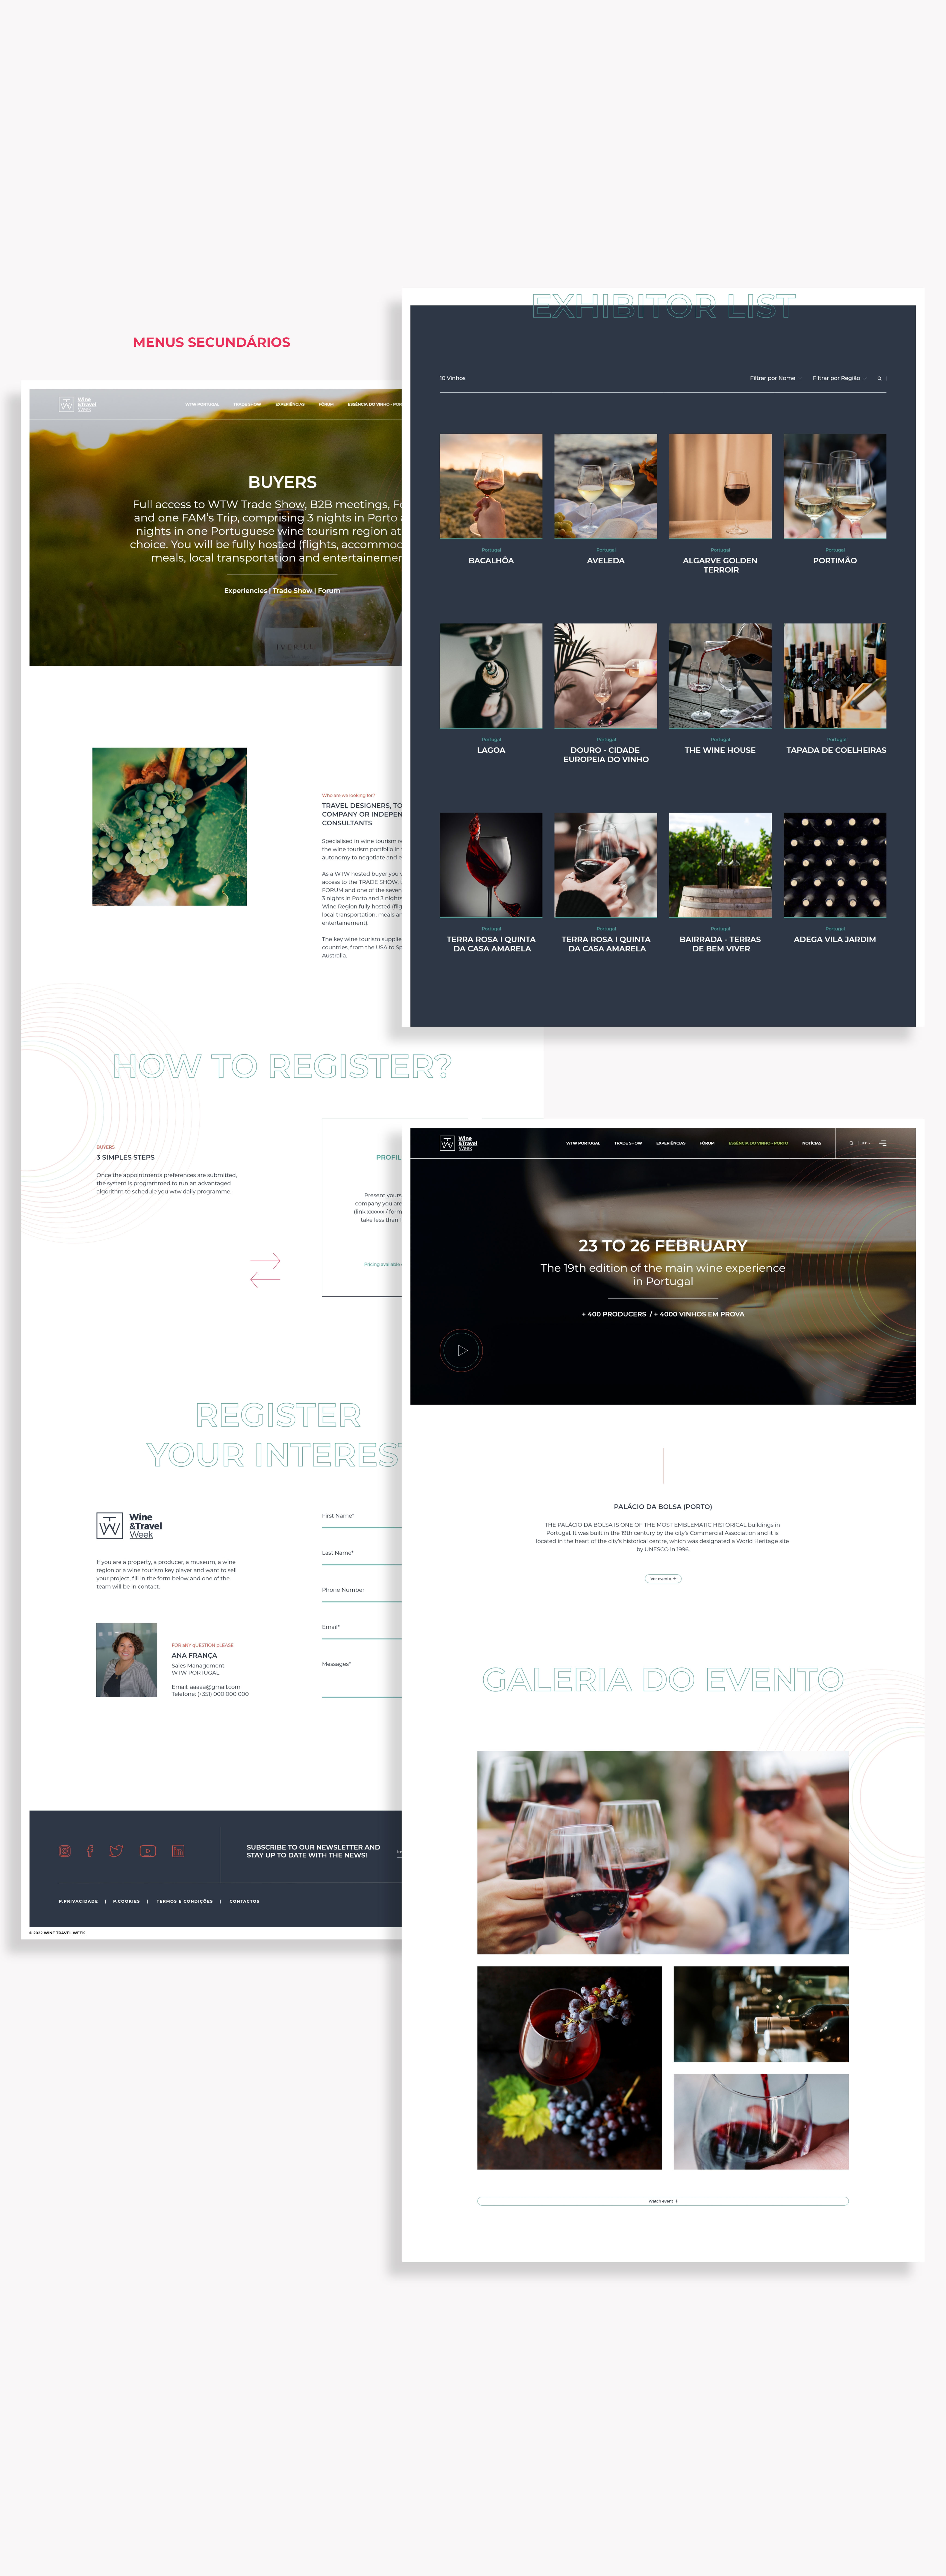 layout of the secondary pages of the website